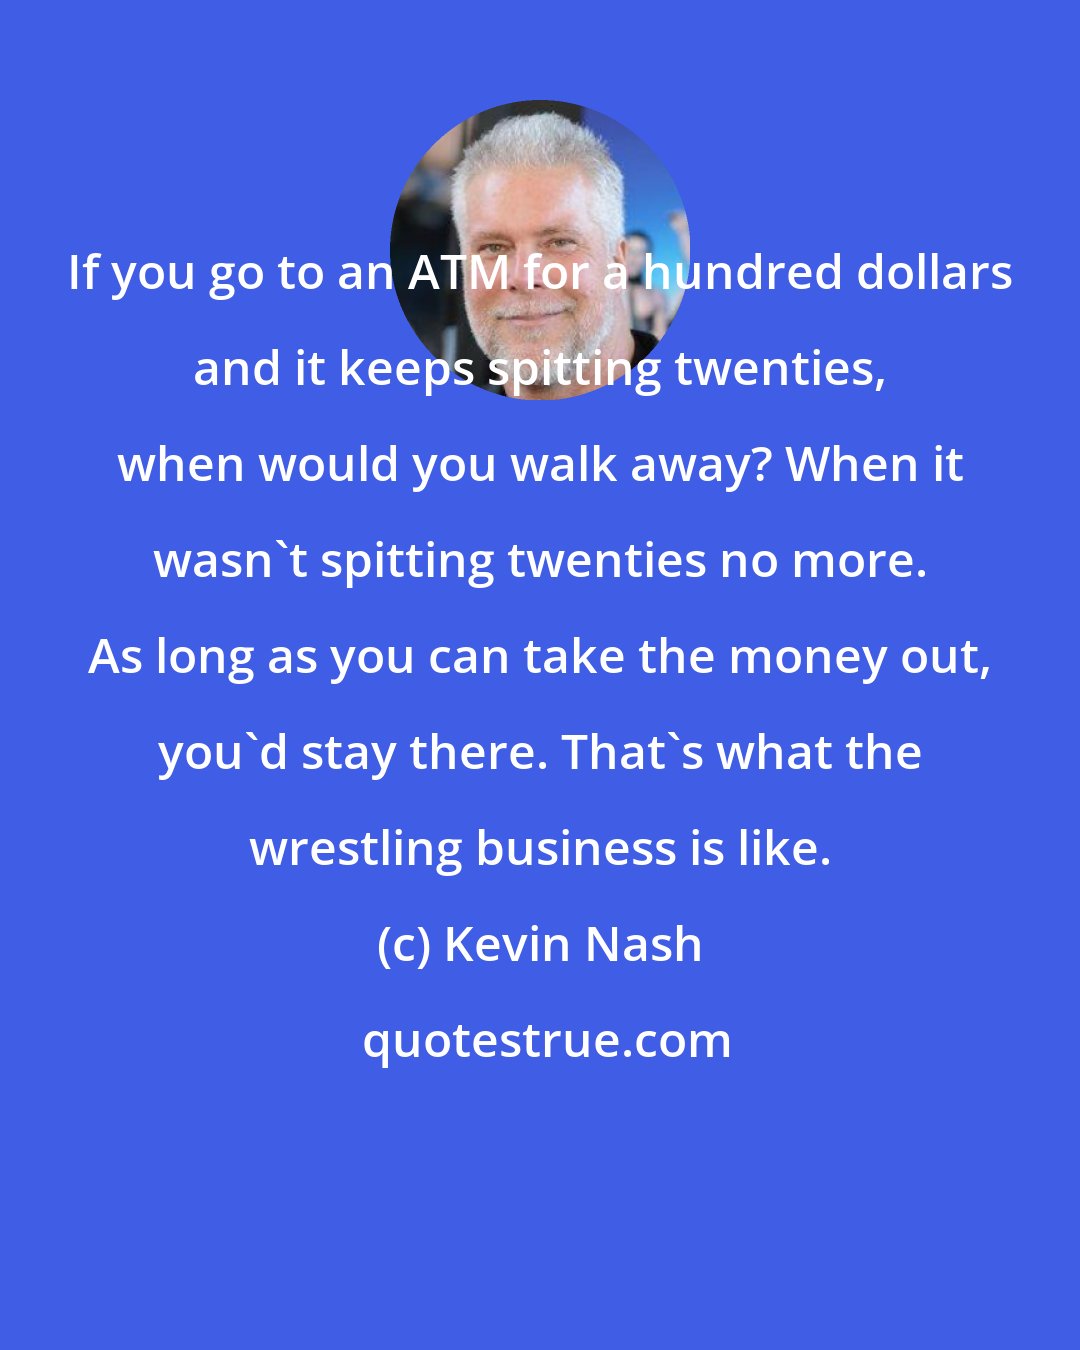 Kevin Nash: If you go to an ATM for a hundred dollars and it keeps spitting twenties, when would you walk away? When it wasn't spitting twenties no more. As long as you can take the money out, you'd stay there. That's what the wrestling business is like.